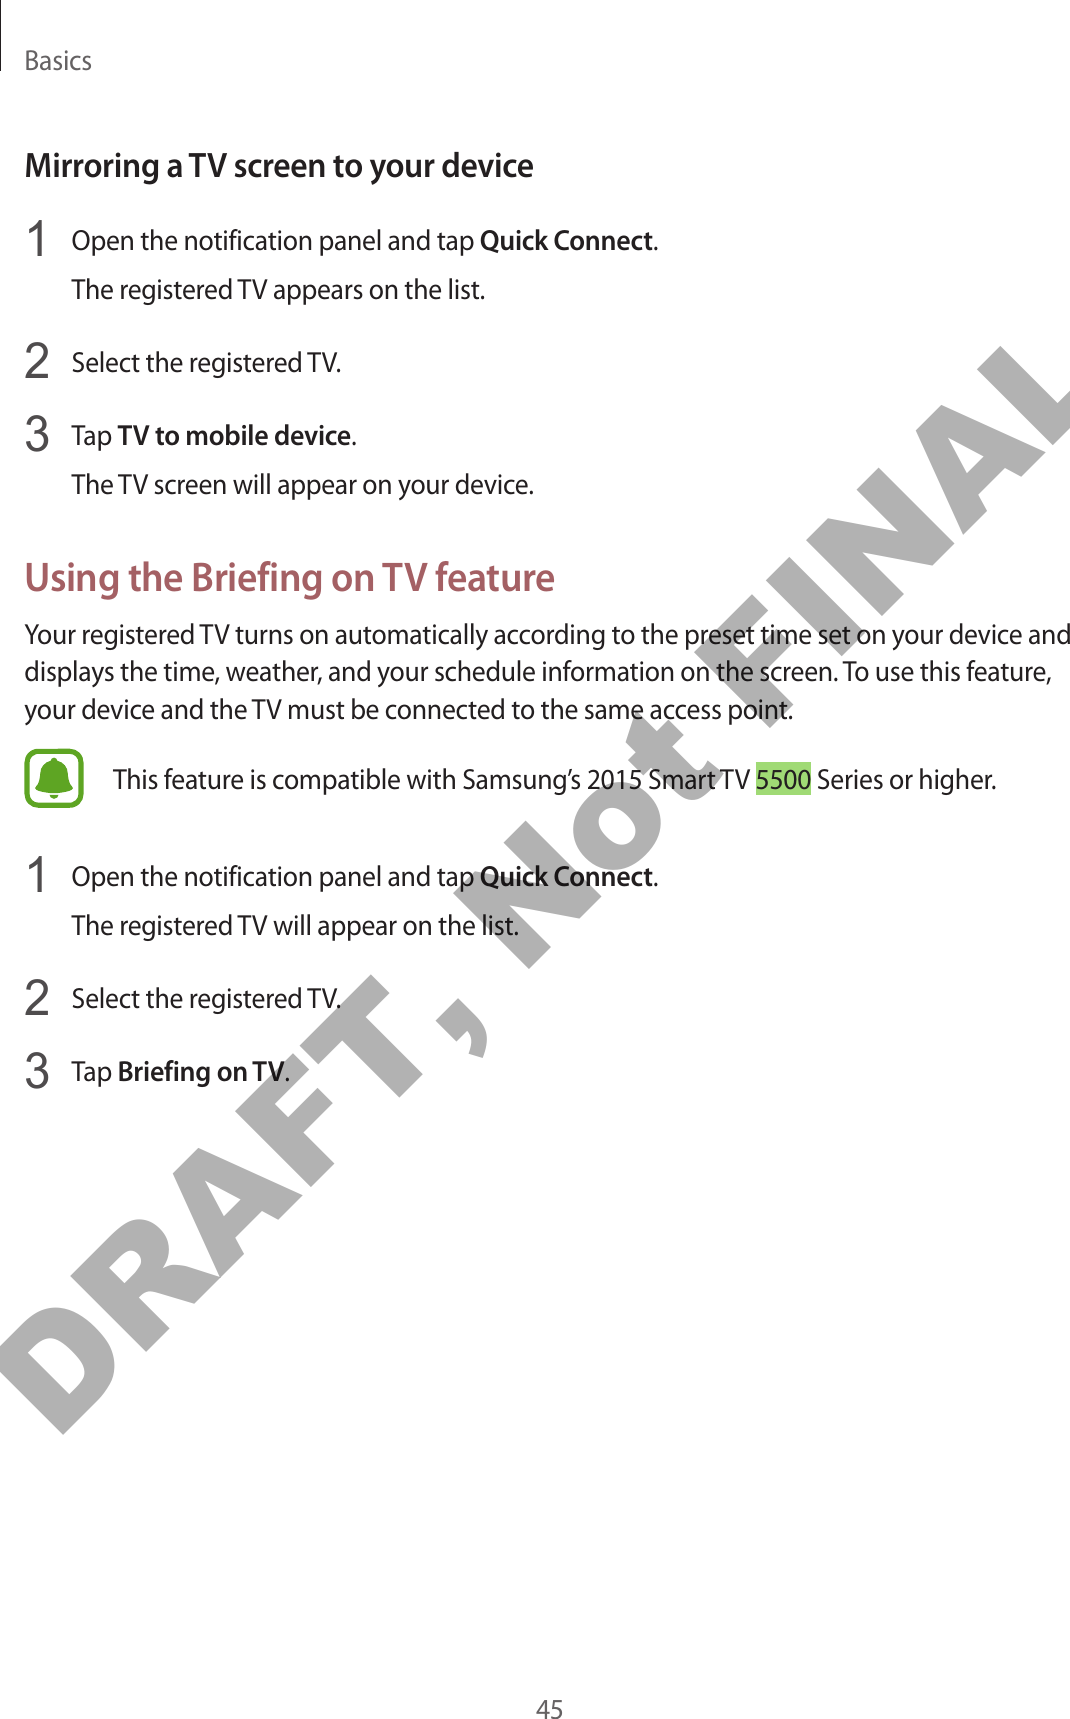 Basics45Mirroring a TV screen to your device1  Open the notification panel and tap Quick Connect.The registered TV appears on the list.2  Select the registered TV.3  Tap TV to mobile device.The TV screen will appear on your device.Using the Briefing on TV featureYour registered TV turns on automatically according to the preset time set on your device and displays the time, weather, and your schedule information on the screen. To use this feature, your device and the TV must be connected to the same access point.This feature is compatible with Samsung’s 2015 Smart TV 5500 Series or higher.1  Open the notification panel and tap Quick Connect.The registered TV will appear on the list.2  Select the registered TV.3  Tap Briefing on TV.DRAFT, Not FINAL